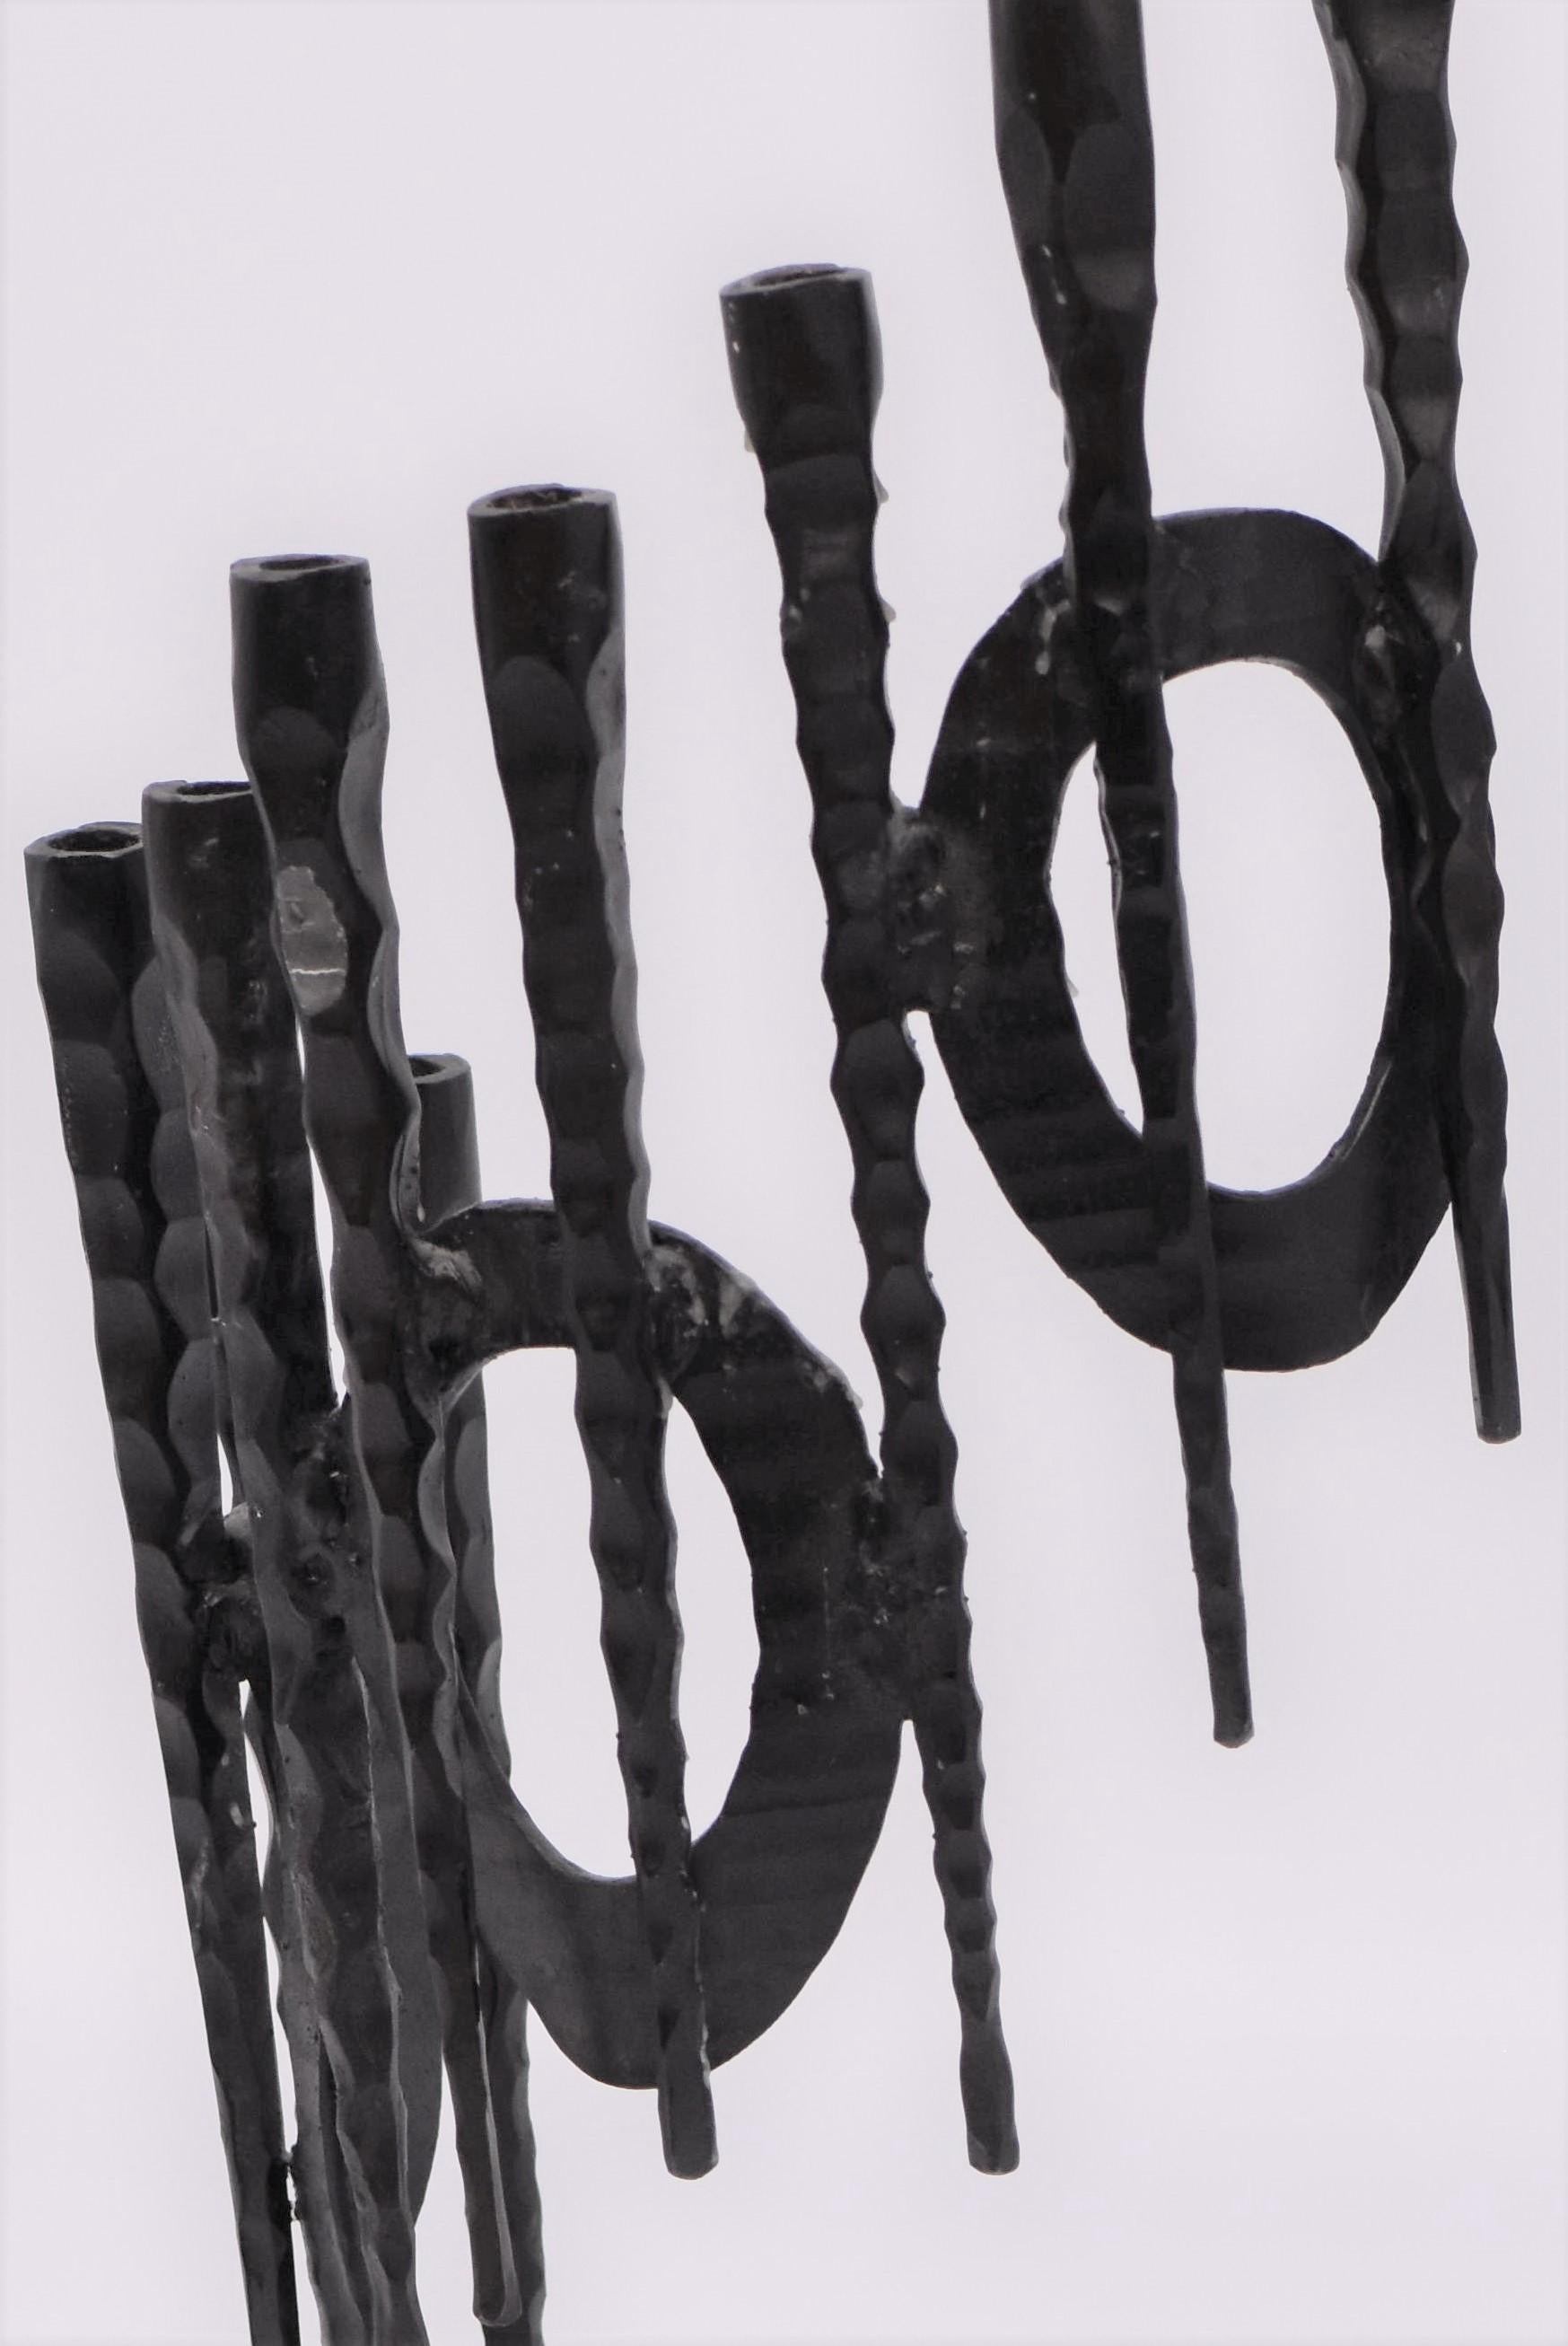 Rare, and large, hand forged, iron Hanukkah lamp Menorah in the style known as “Brutalism”, David Palombo, Jerusalem, Israel, circa 1960. 

David Palombo (1920-1966), was a sculptor and painter. He was born in Turkey and immigrated to Israel with